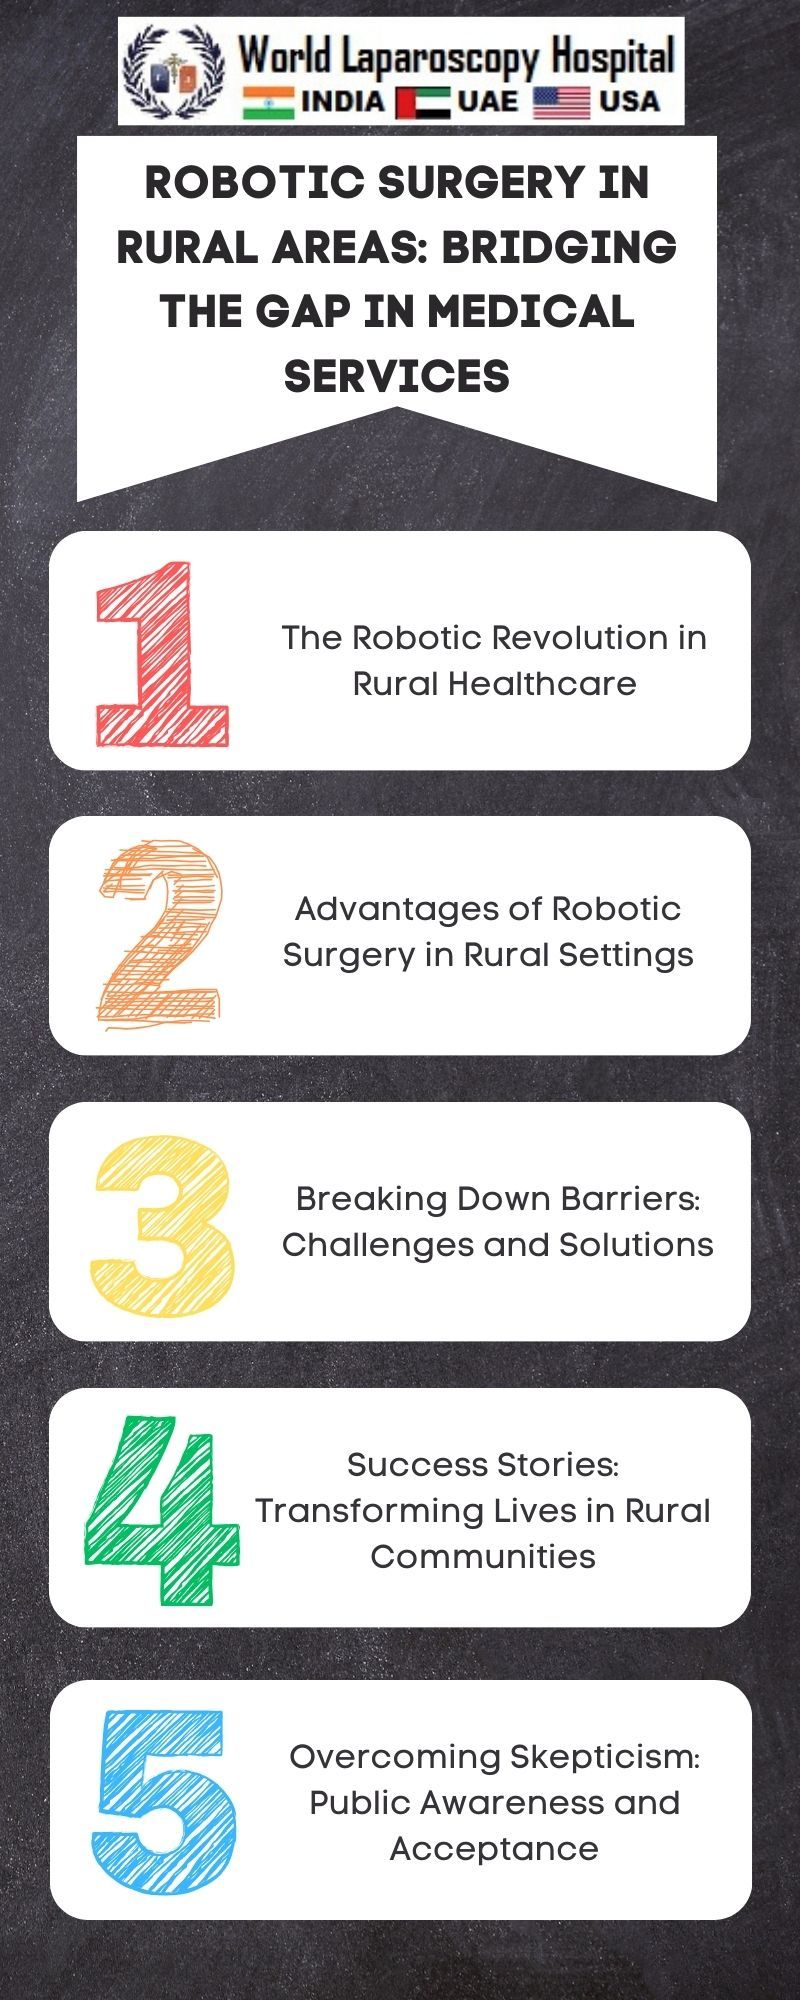 Robotic Surgery in Rural Areas: Bridging the Gap in Medical Services